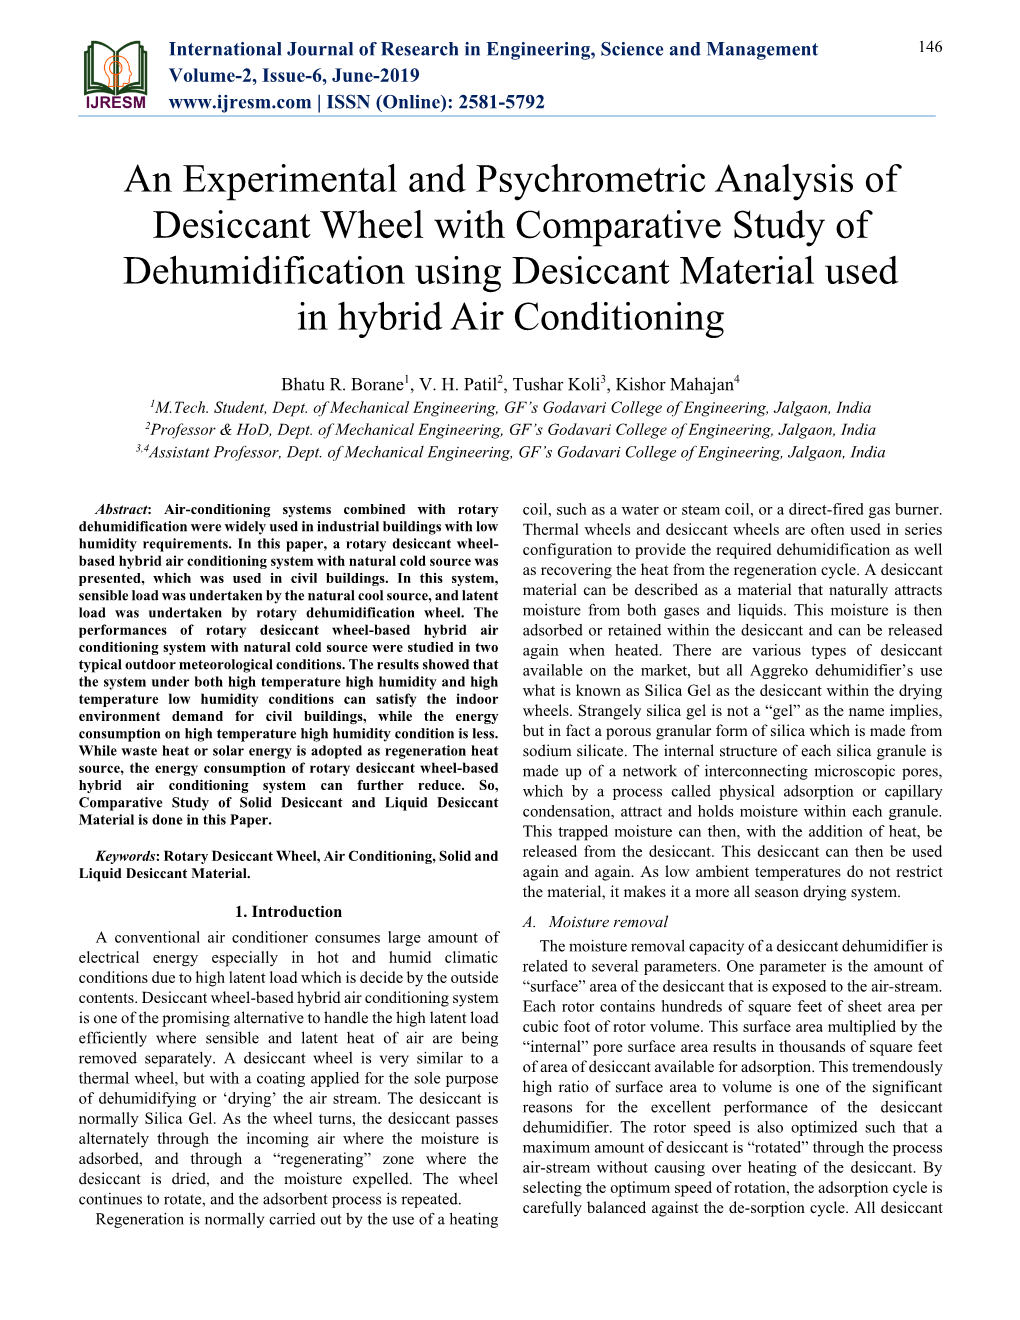 An Experimental and Psychrometric Analysis of Desiccant Wheel with Comparative Study of Dehumidification Using Desiccant Material Used in Hybrid Air Conditioning